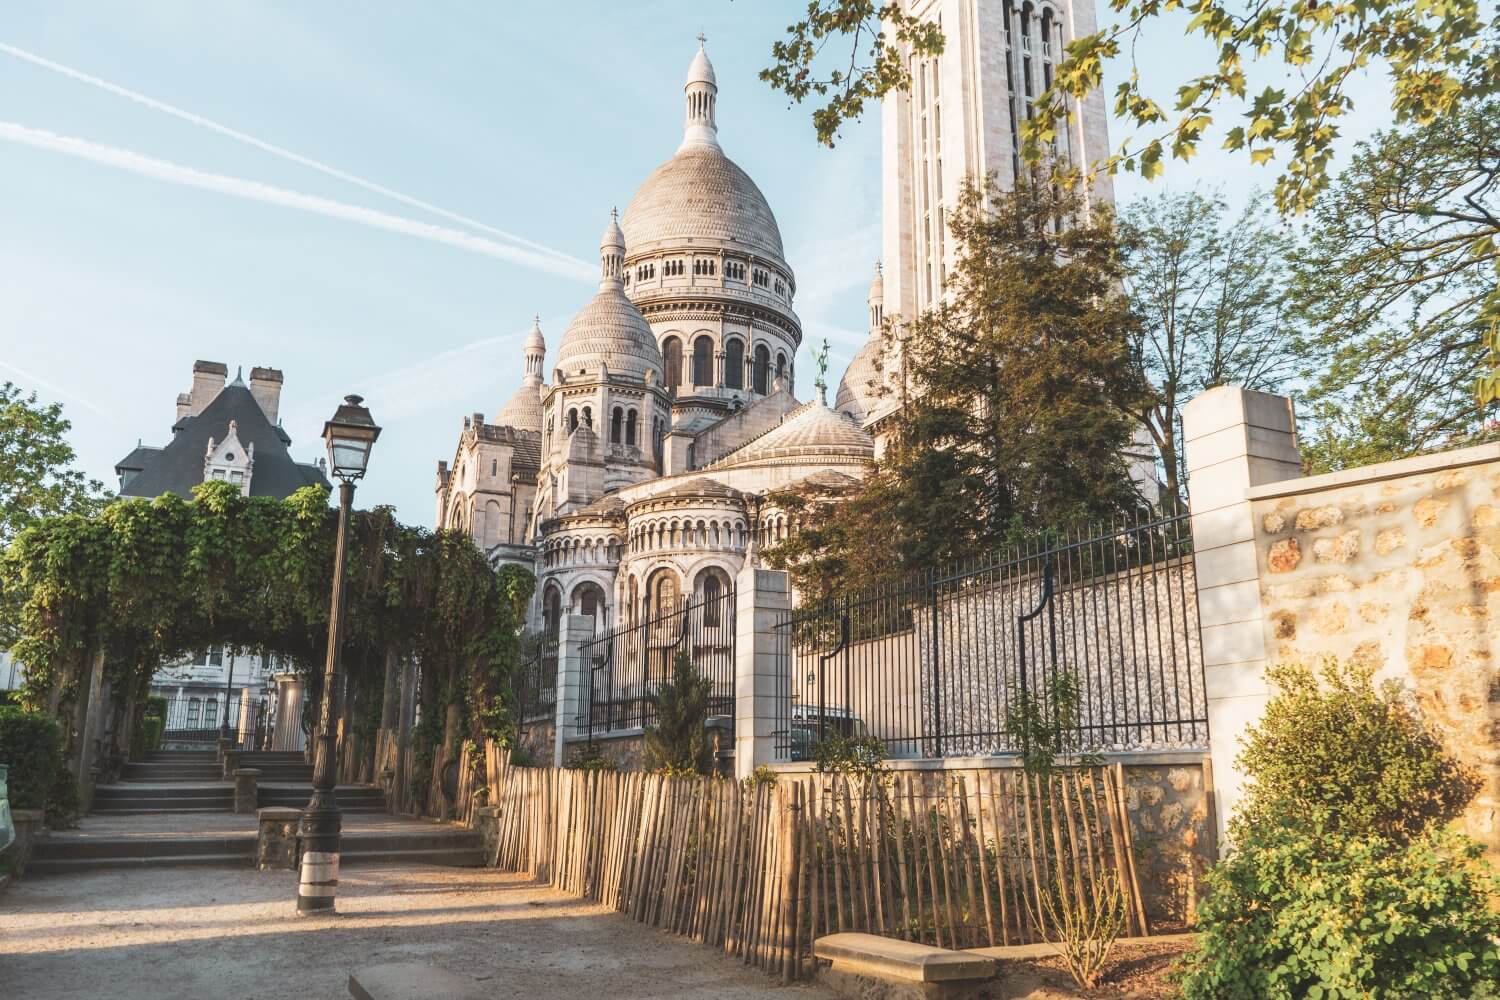 Sacre Coeur Basilica: one of the most iconic Paris landmarks in the city